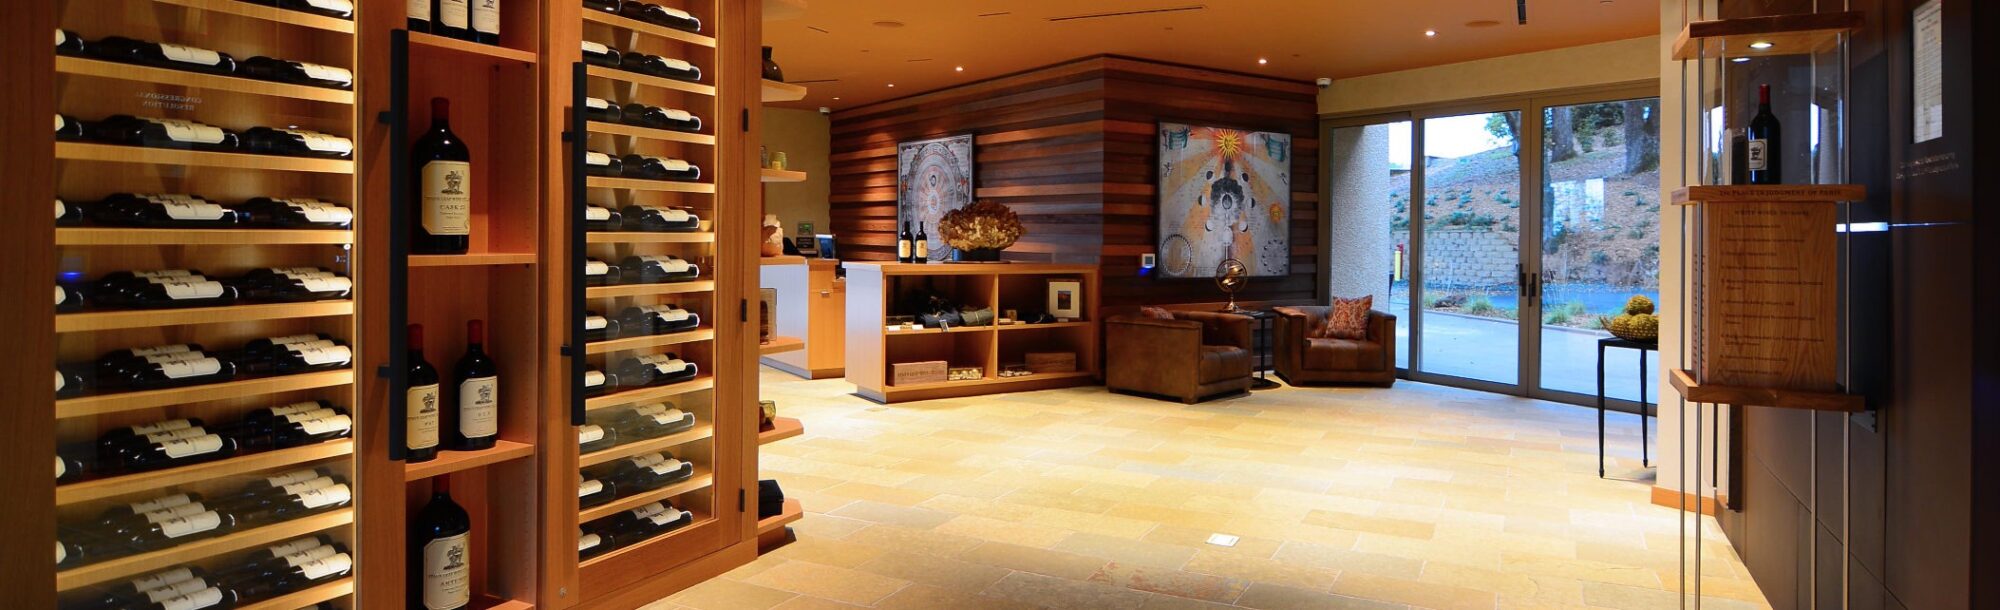 Glenn Rieder provided high end millwork and custom interior finishings for Stag’s Leap Wine Cellars